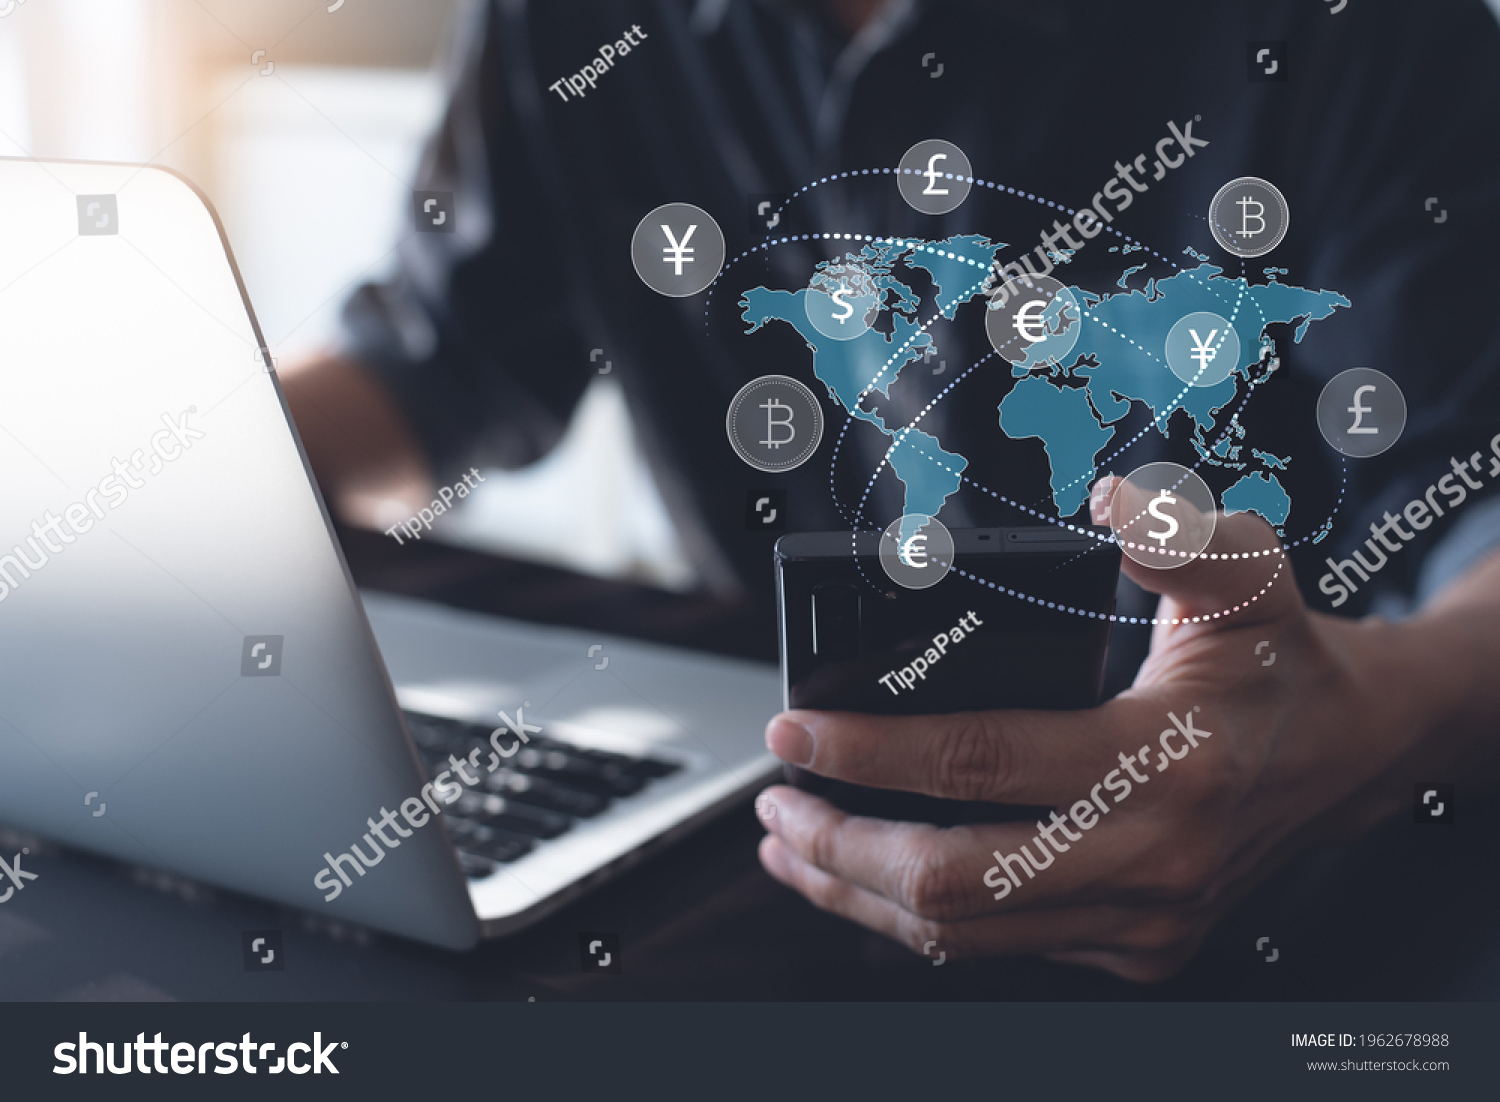 Currency exchange, money transfer, FinTech financial technology, Global business, online banking, interbank payment concept. Man using mobile phone and laptop computer with international currencies #1962678988